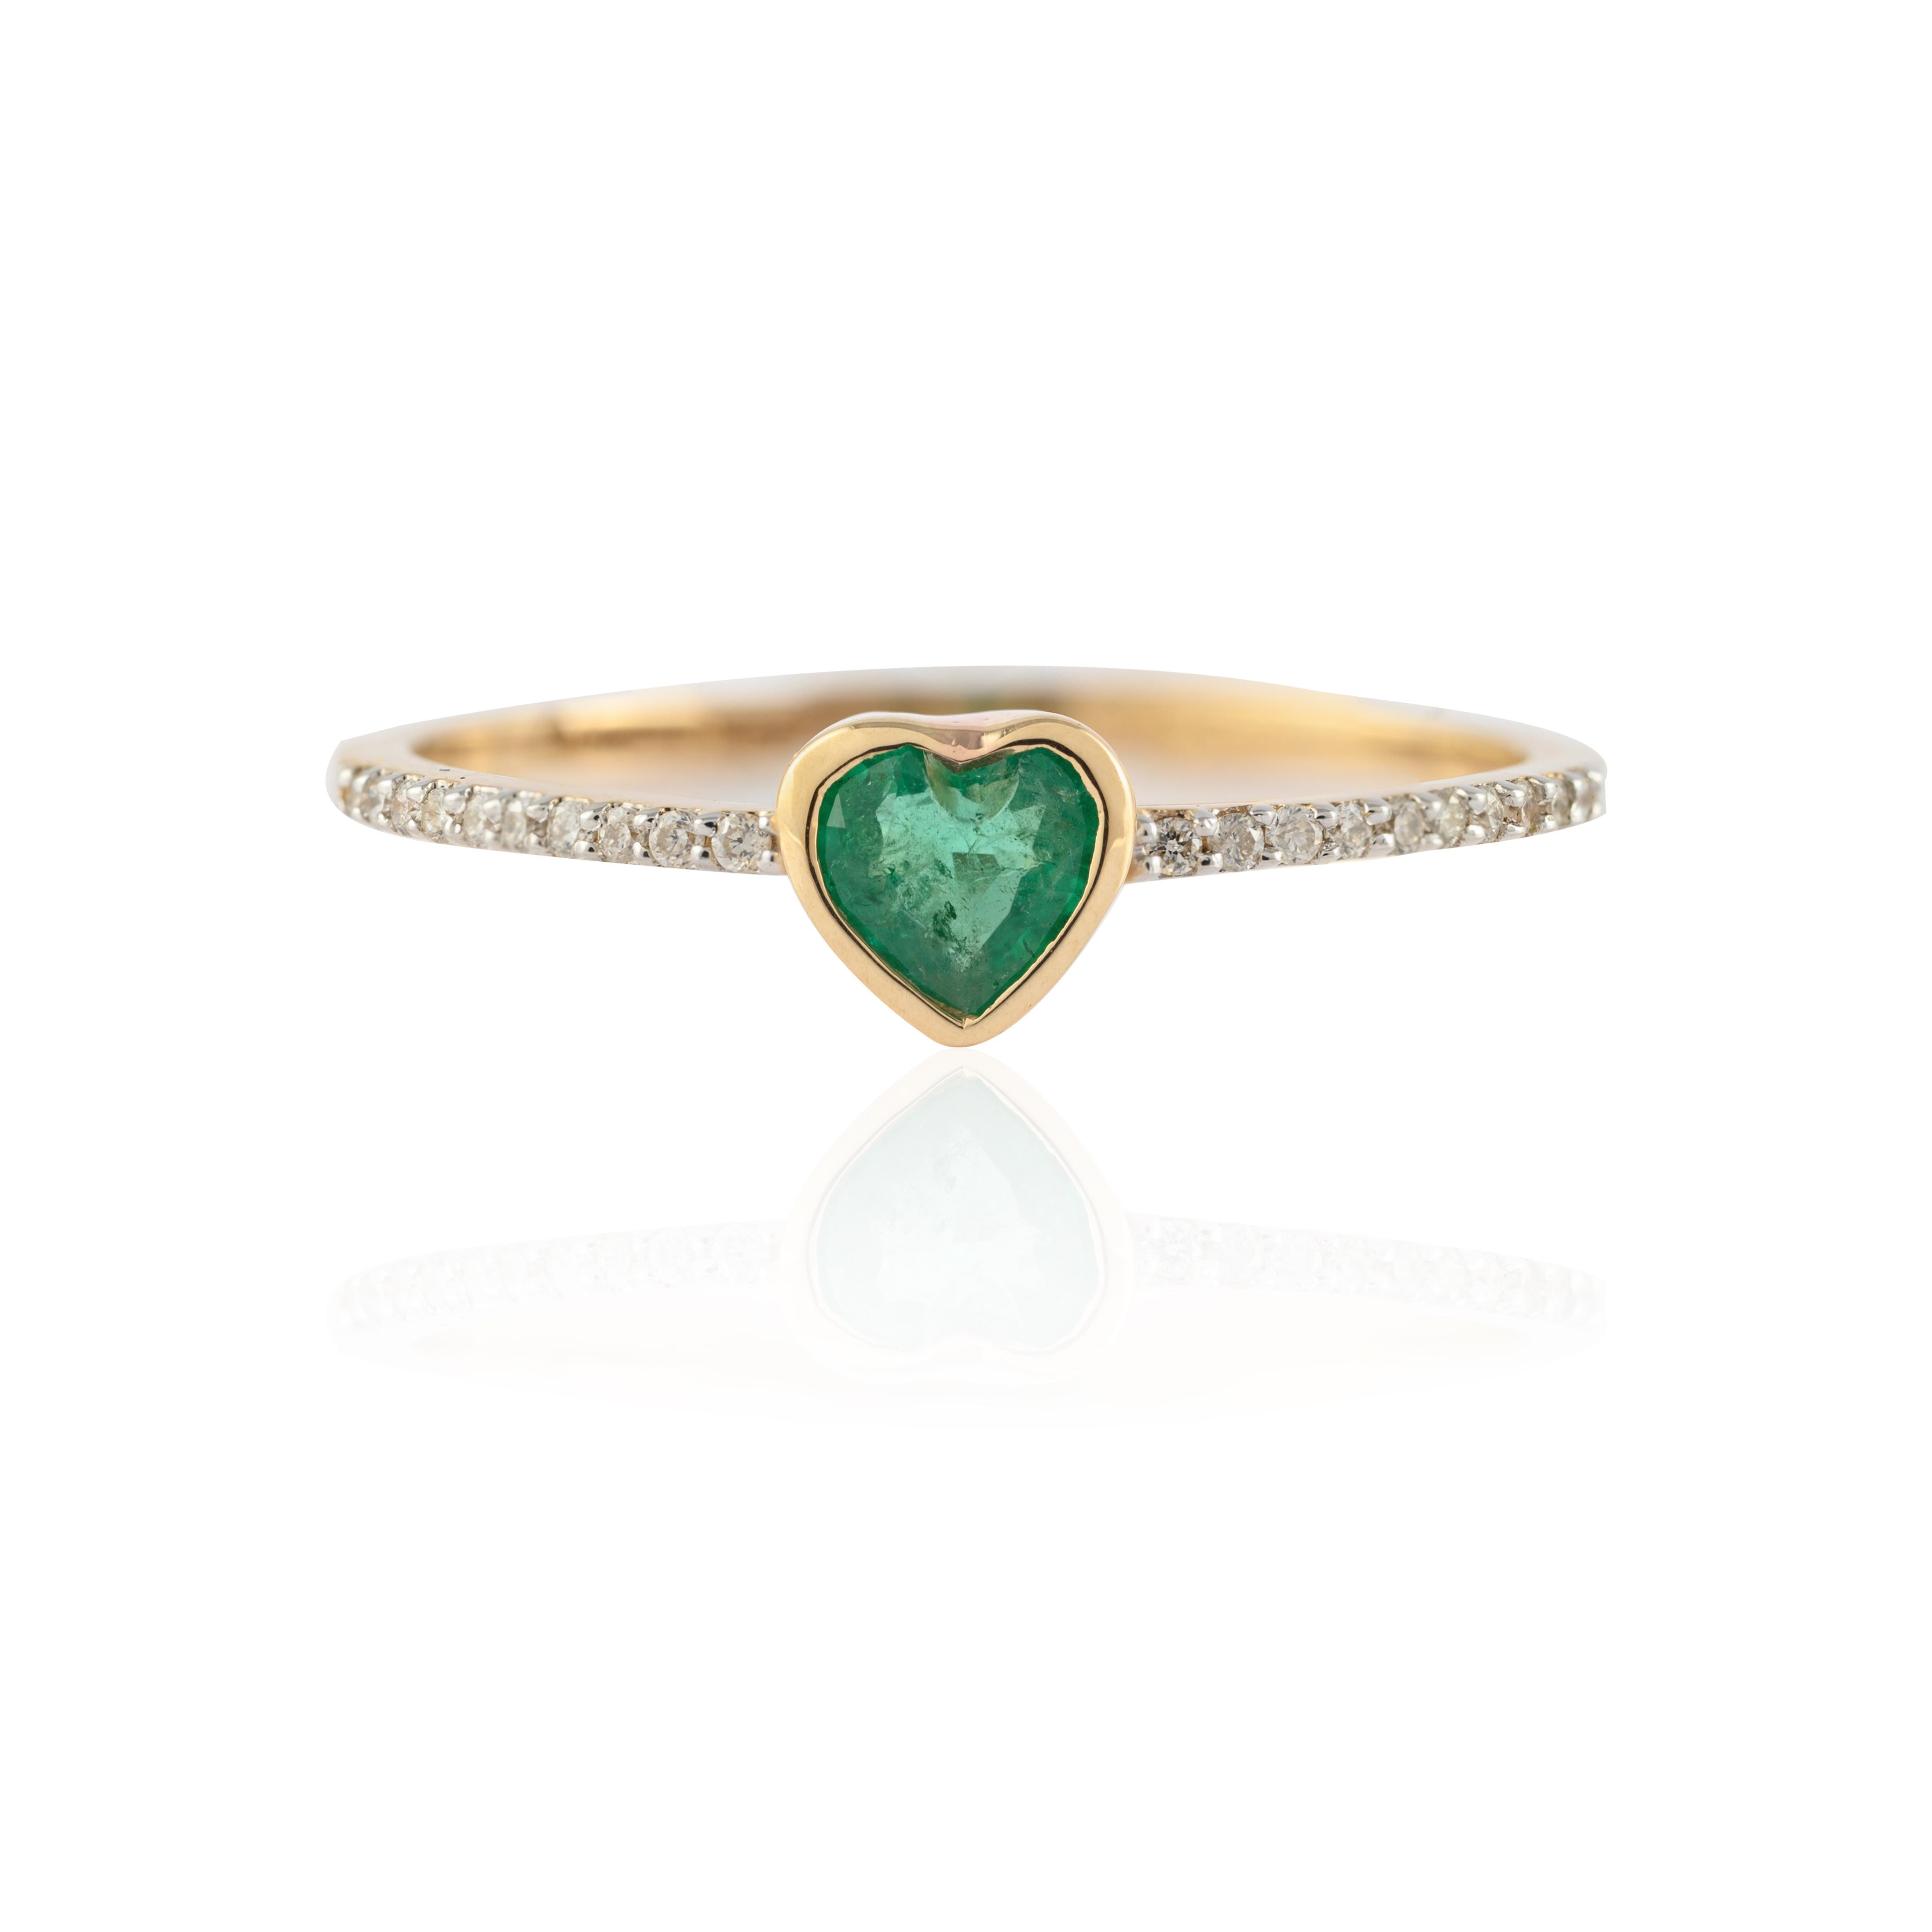 For Sale:  Minimalist Heart Cut Emerald Ring Set in 14k Solid Yellow Gold with Diamonds 2